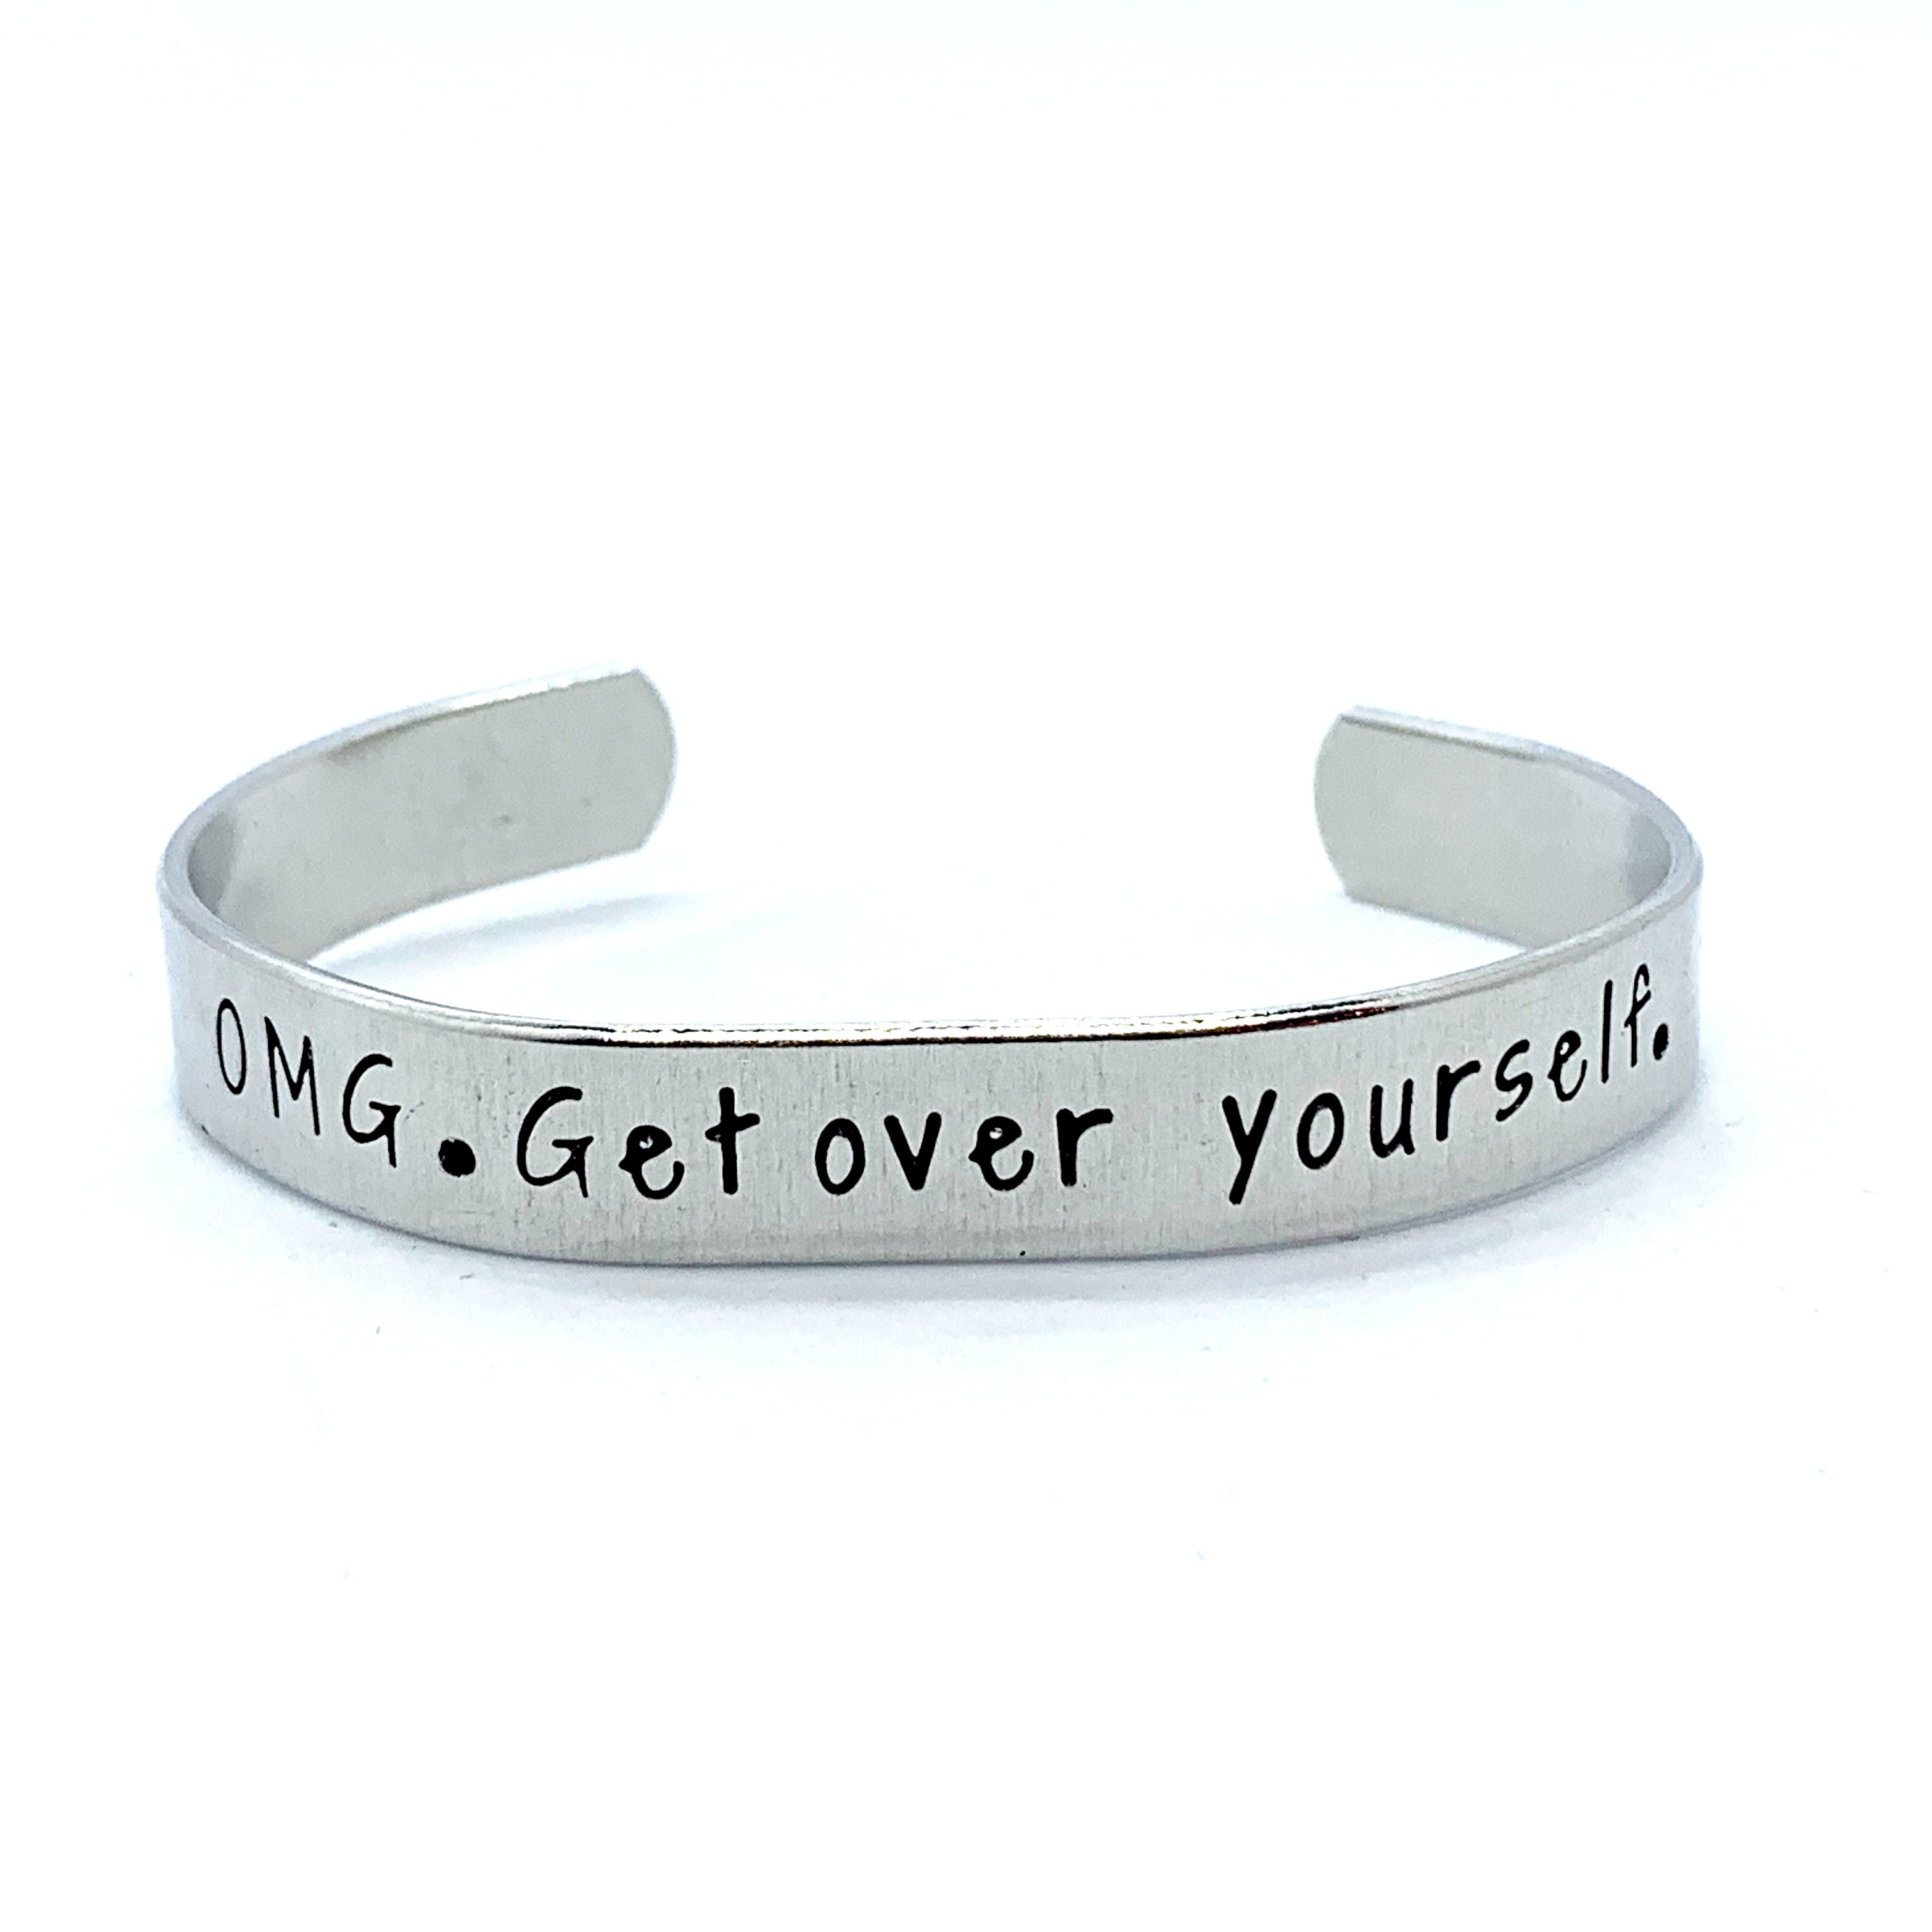 ⅜ inch Aluminum Cuff - OMG. Get Over Yourself